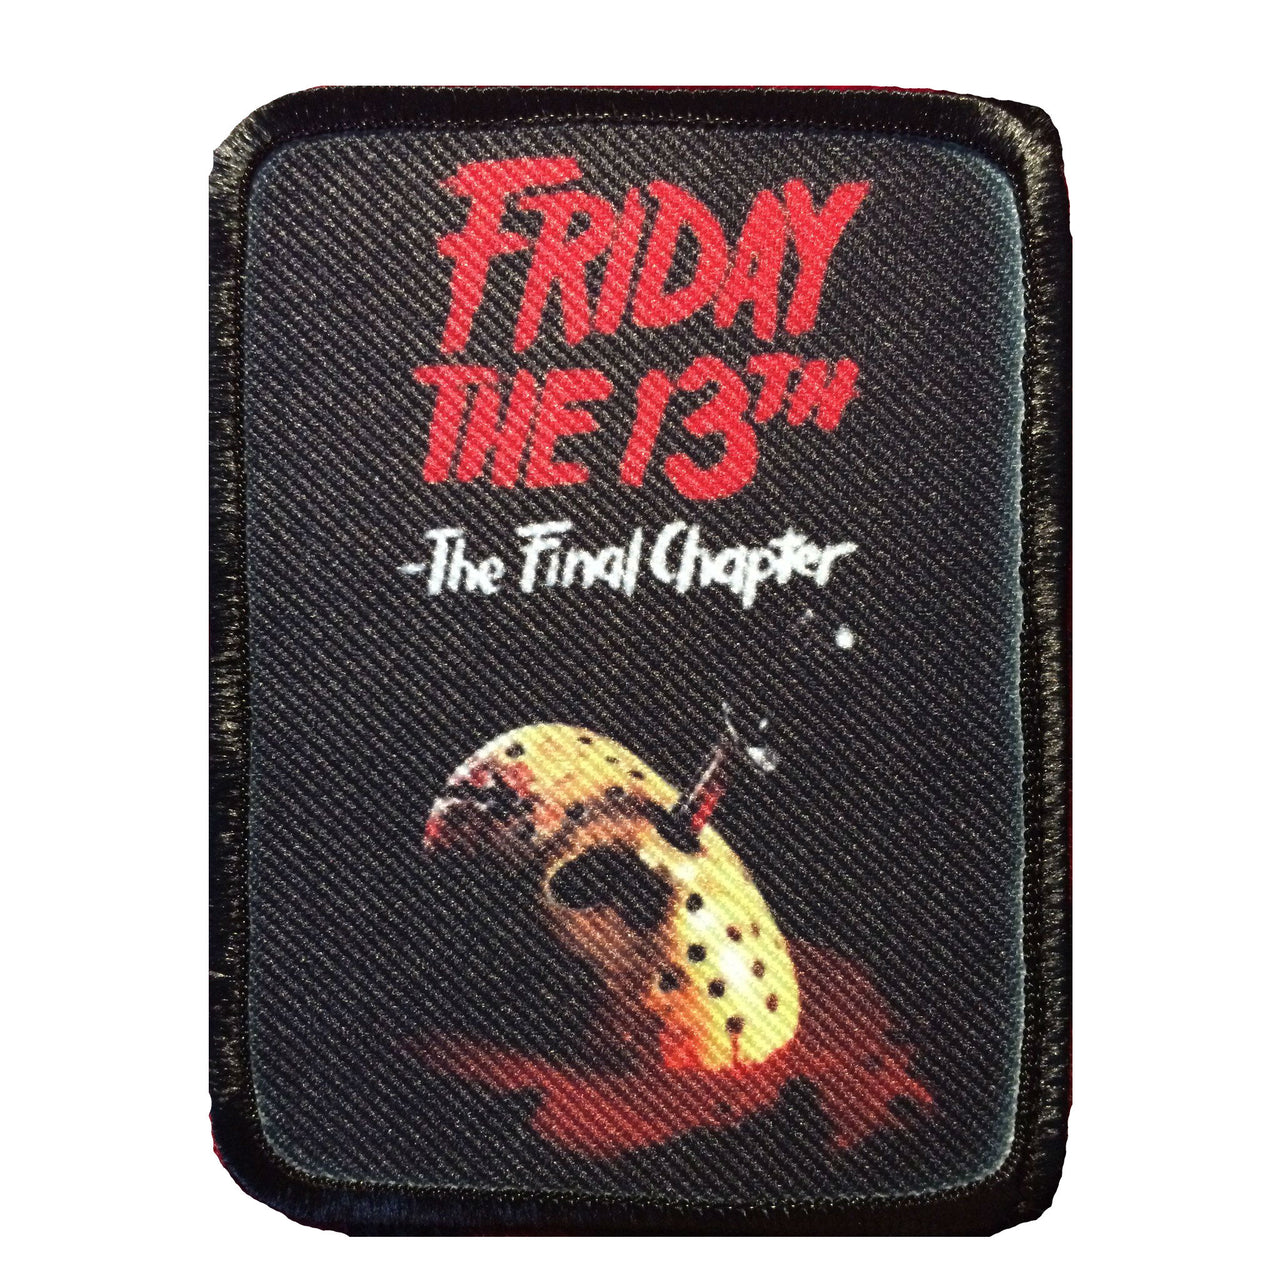 Friday the 13th IV Patch